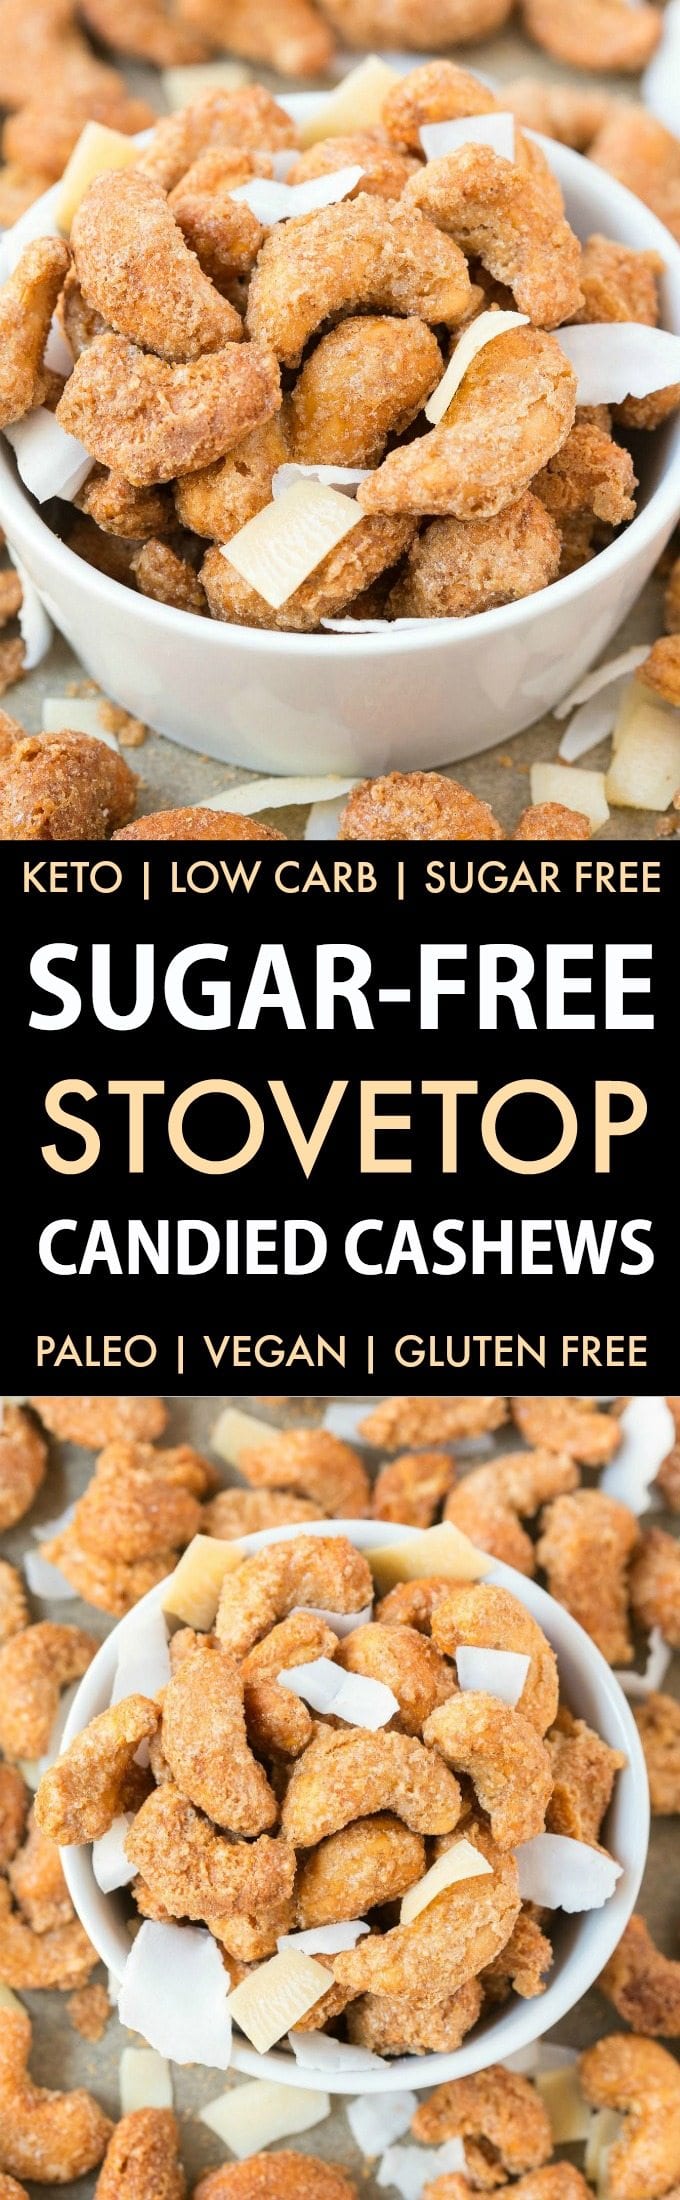 Easy Sugar-Free Candied Cashews (Keto, Low Carb, Paleo)- Stovetop made candied cashews made with zero sugar or oil- Perfect for holidays, gifts and every day guilt-free snacking! {vegan, gluten free, dairy free recipe}- #cashews #sugarfree #lowcarb #ketodessert | Recipe on thebigmansworld.com